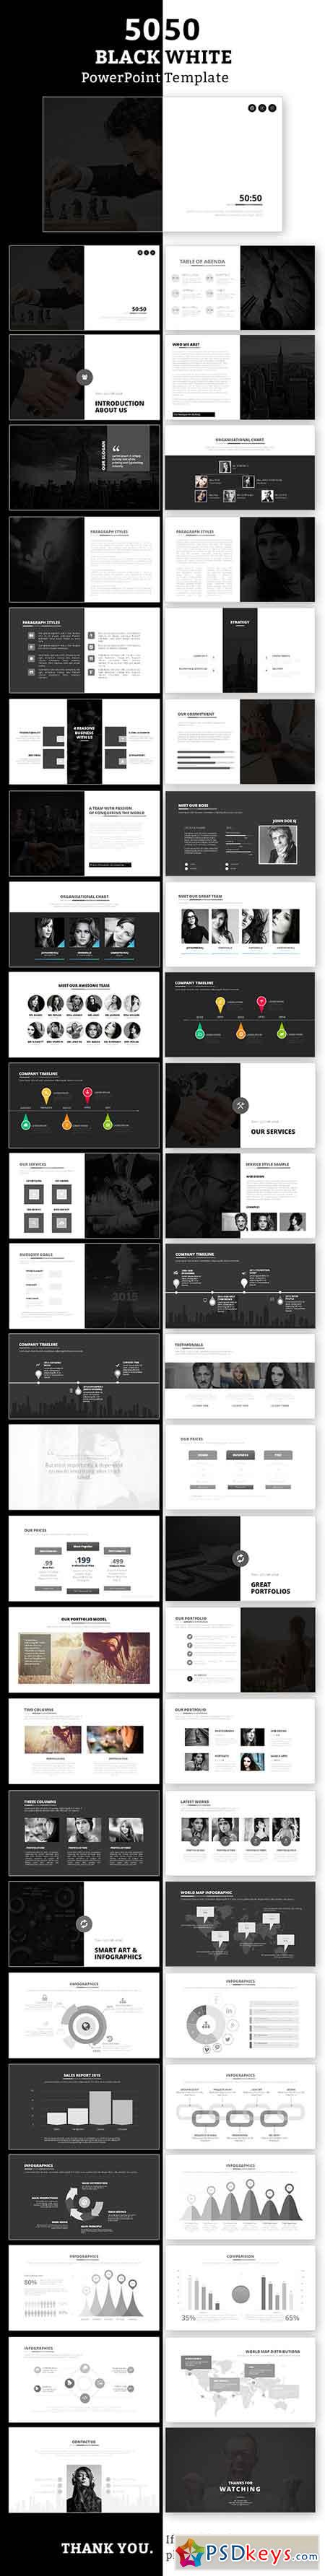 50 50 PowerPoint Template 12948281